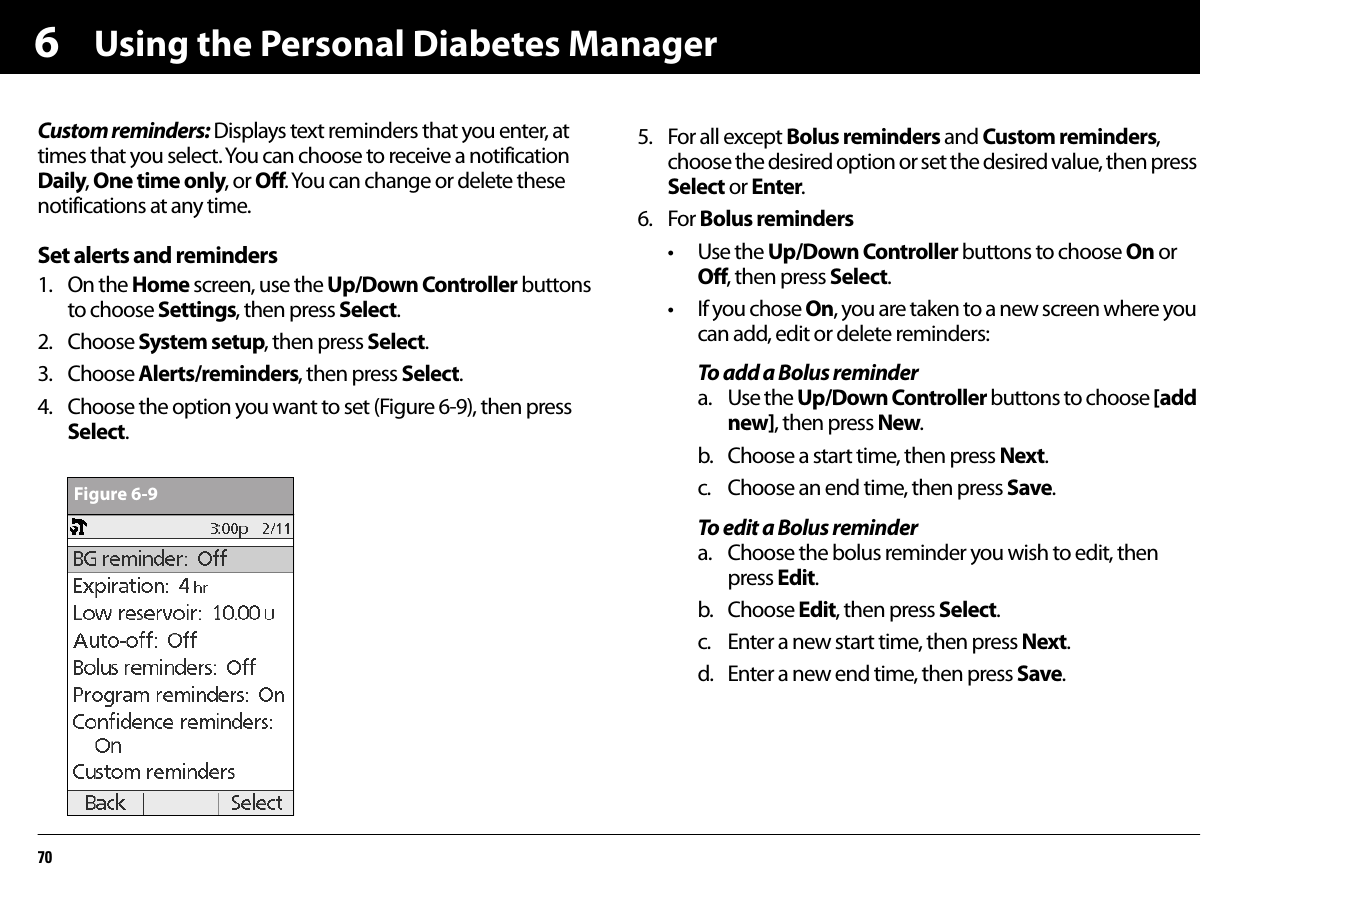 Using the Personal Diabetes Manager706Custom reminders: Displays text reminders that you enter, at times that you select. You can choose to receive a notification Daily, One time only, or Off. You can change or delete these notifications at any time.Set alerts and reminders1. On the Home screen, use the Up/Down Controller buttons to choose Settings, then press Select.2. Choose System setup, then press Select.3. Choose Alerts/reminders, then press Select.4. Choose the option you want to set (Figure 6-9), then press Select.5. For all except Bolus reminders and Custom reminders, choose the desired option or set the desired value, then press Select or Enter.6. For Bolus reminders• Use the Up/Down Controller buttons to choose On or Off, then press Select.• If you chose On, you are taken to a new screen where you can add, edit or delete reminders:To add a Bolus remindera. Use the Up/Down Controller buttons to choose [add new], then press New.b. Choose a start time, then press Next.c. Choose an end time, then press Save.To edit a Bolus remindera. Choose the bolus reminder you wish to edit, then press Edit.b. Choose Edit, then press Select.c. Enter a new start time, then press Next.d. Enter a new end time, then press Save.Figure 6-9